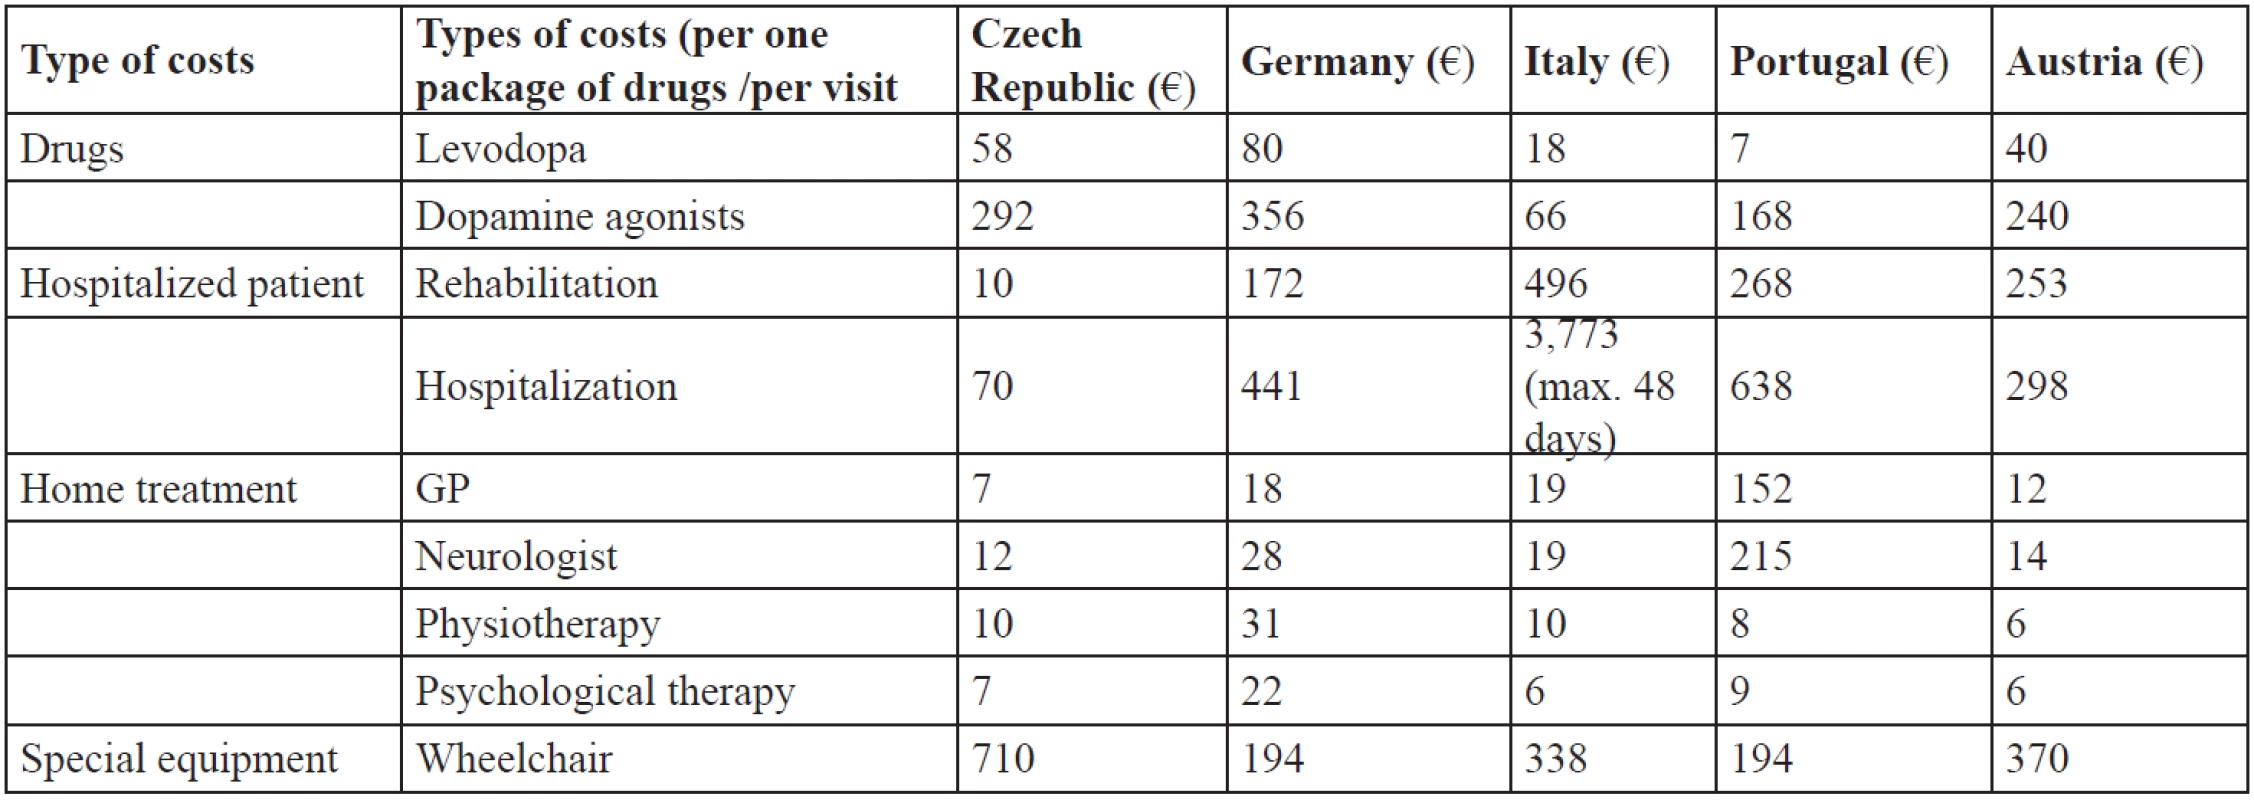 Selected individual costs in chosen European countries